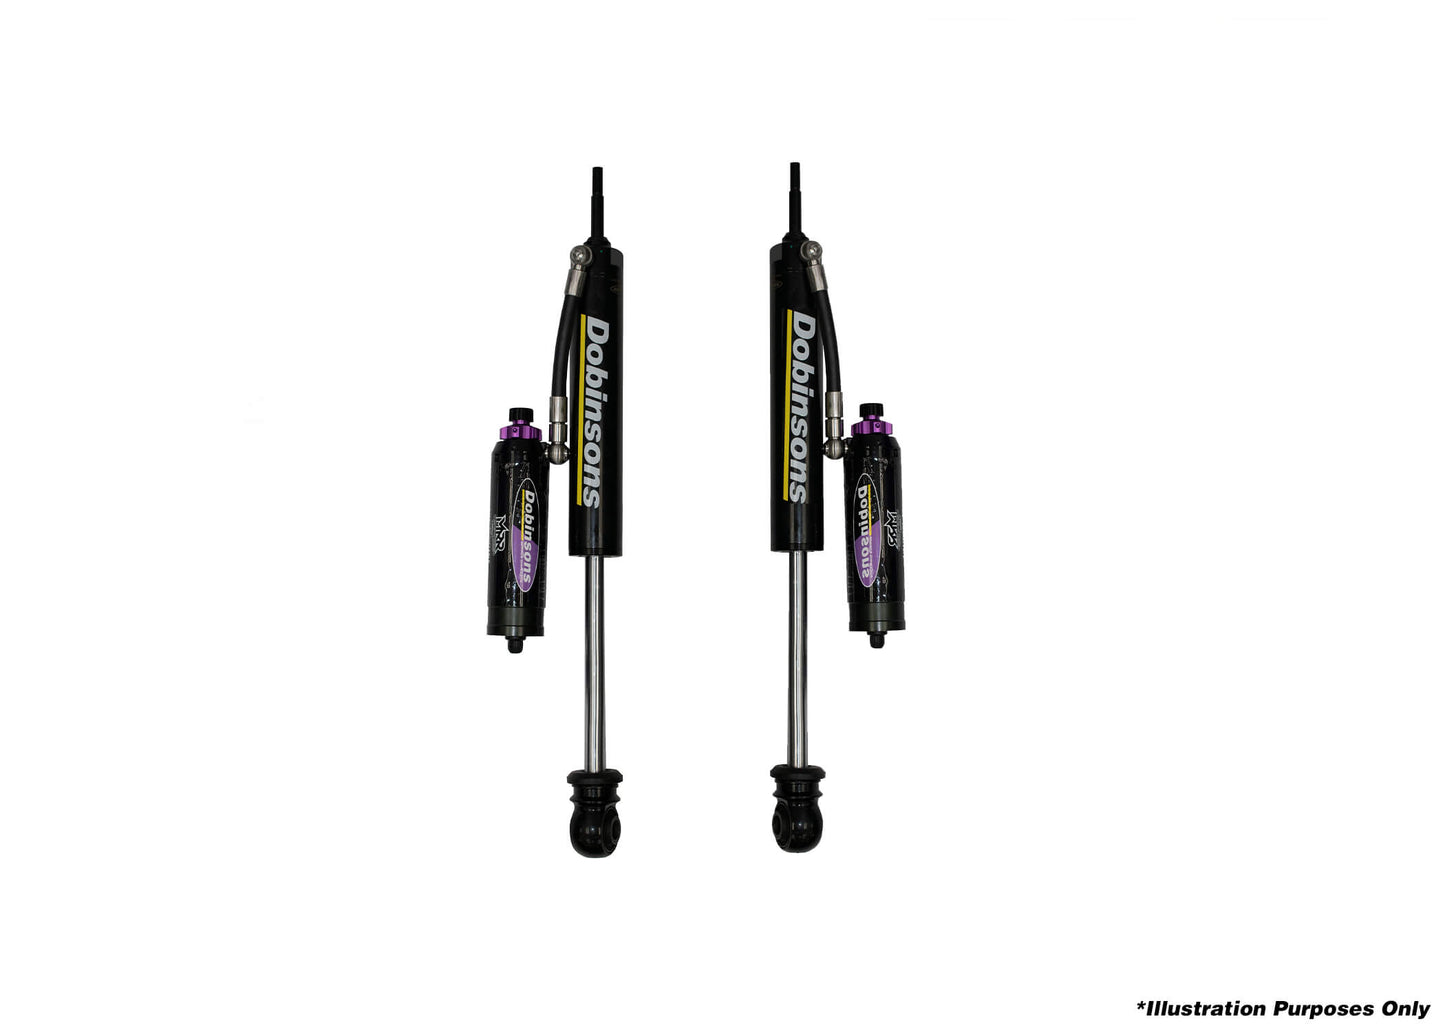 Rear MRR 3-way Adjustable Shocks for Toyota Land Cruiser 80/100 series 1990-1997 for 0-3" of Lift